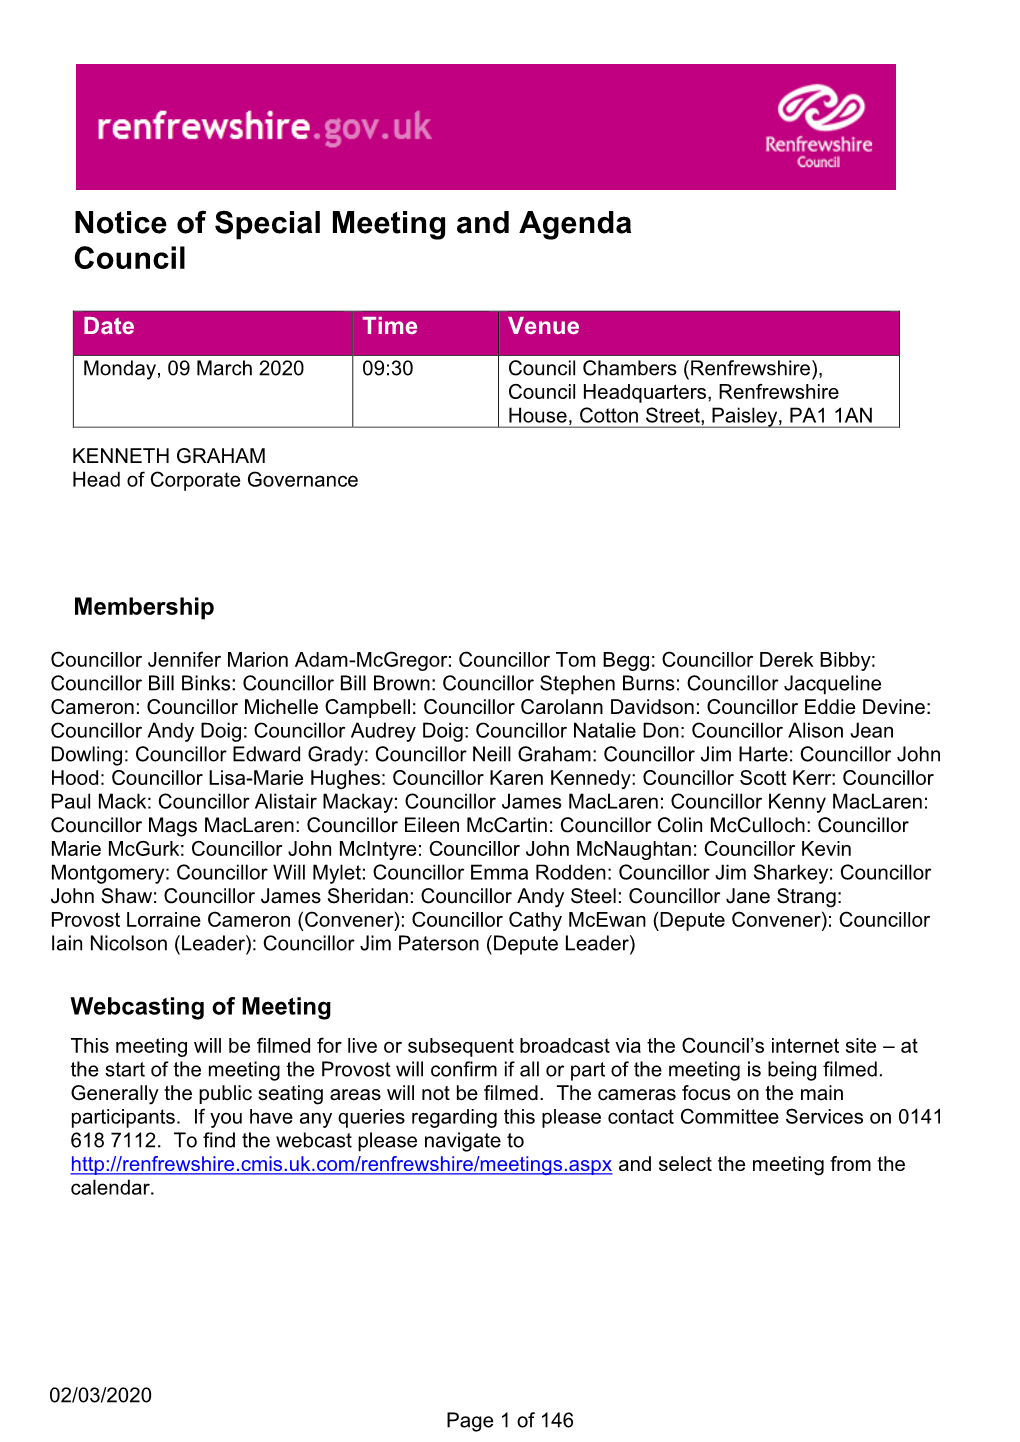 Notice of Special Meeting and Agenda Council